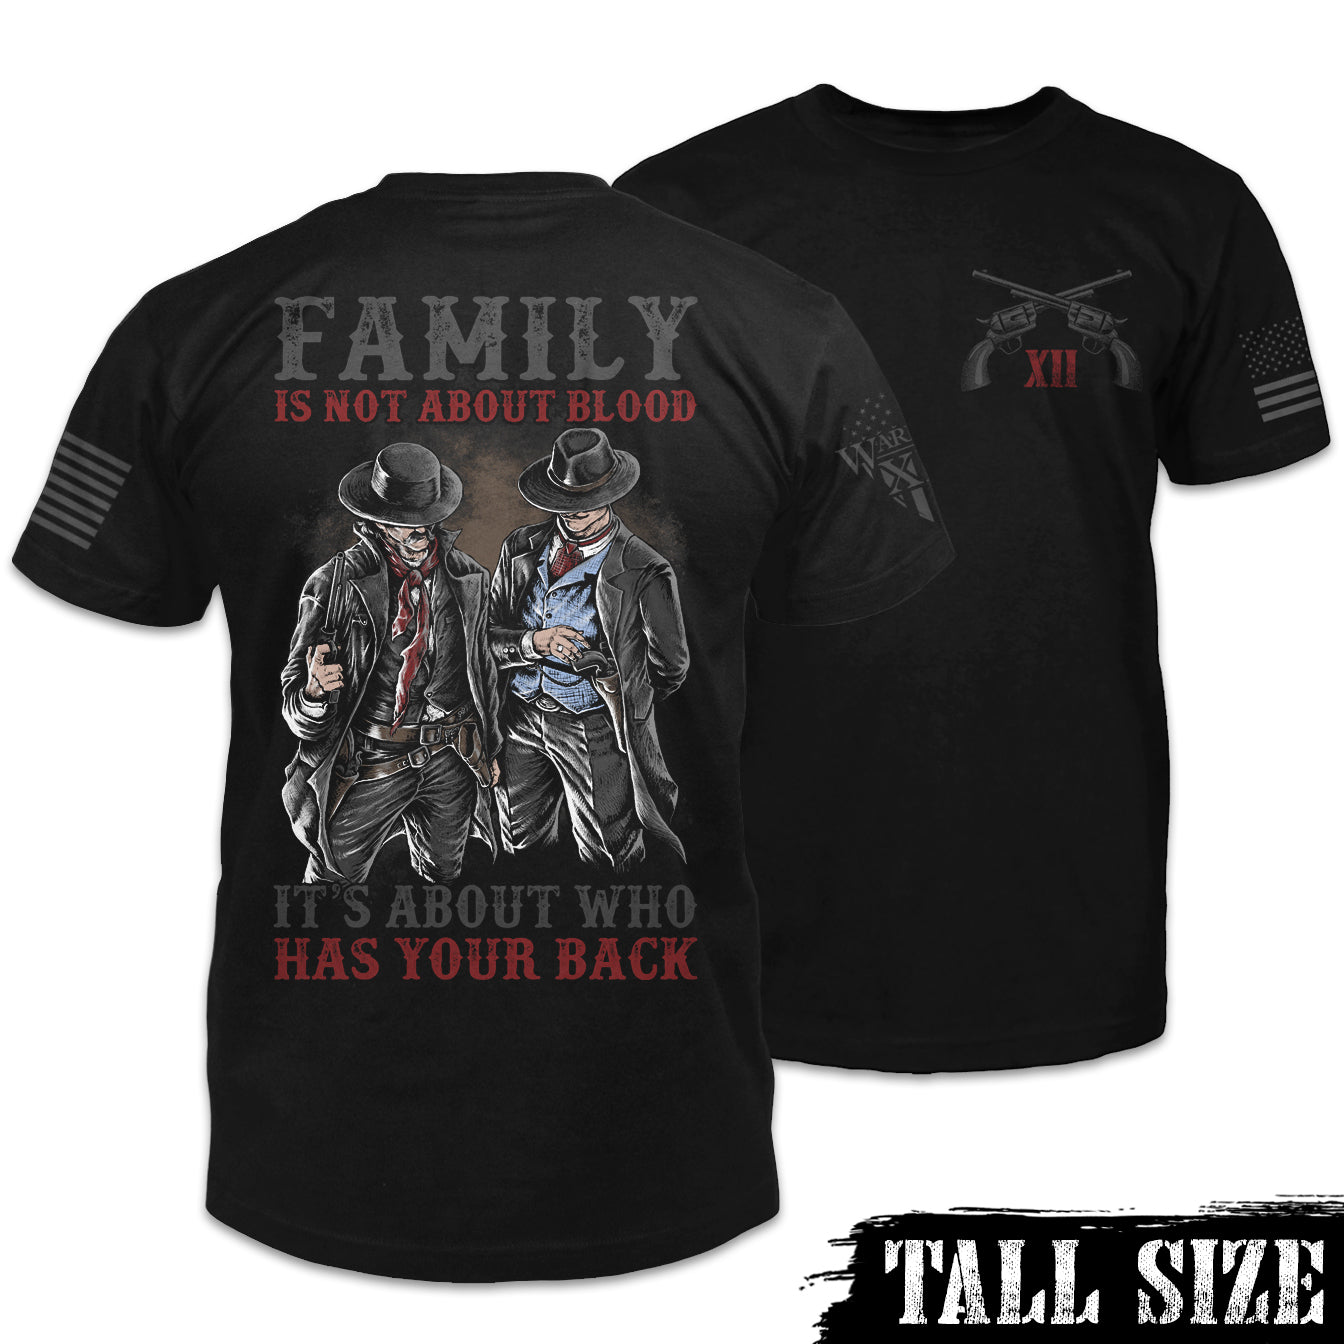 Family - Tall Size